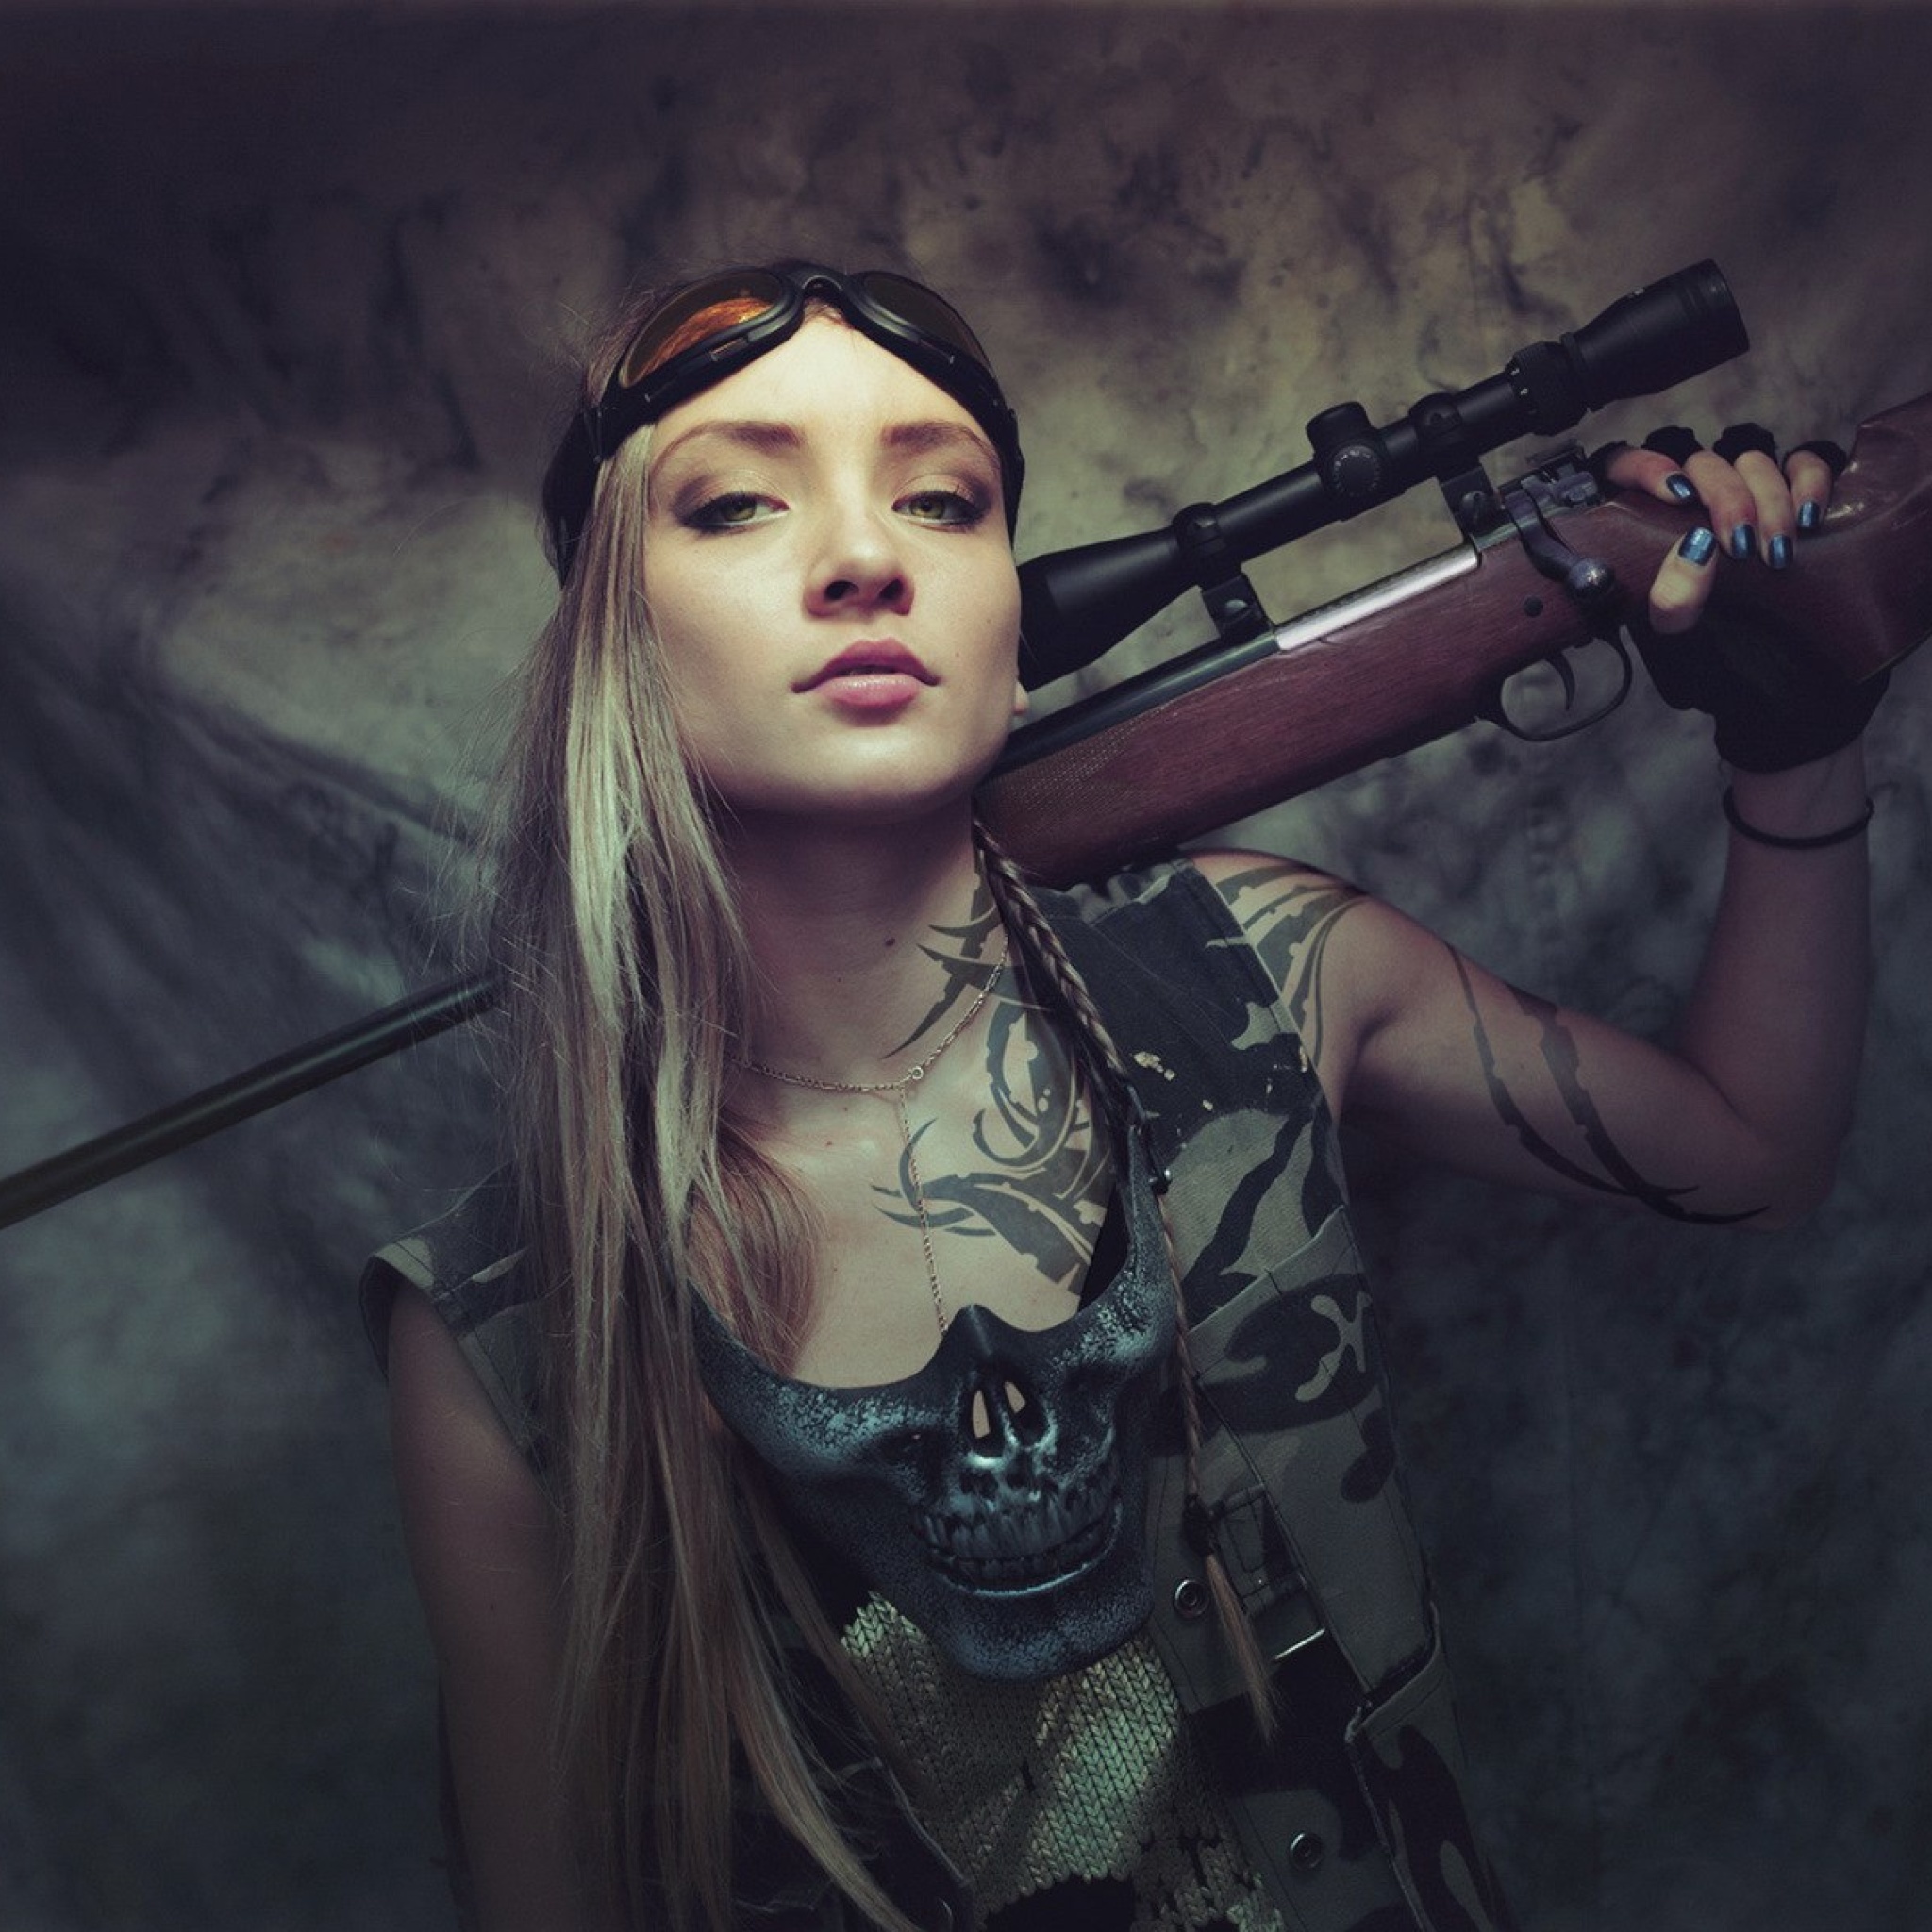 Das Soldier girl with a sniper rifle Wallpaper 2048x2048